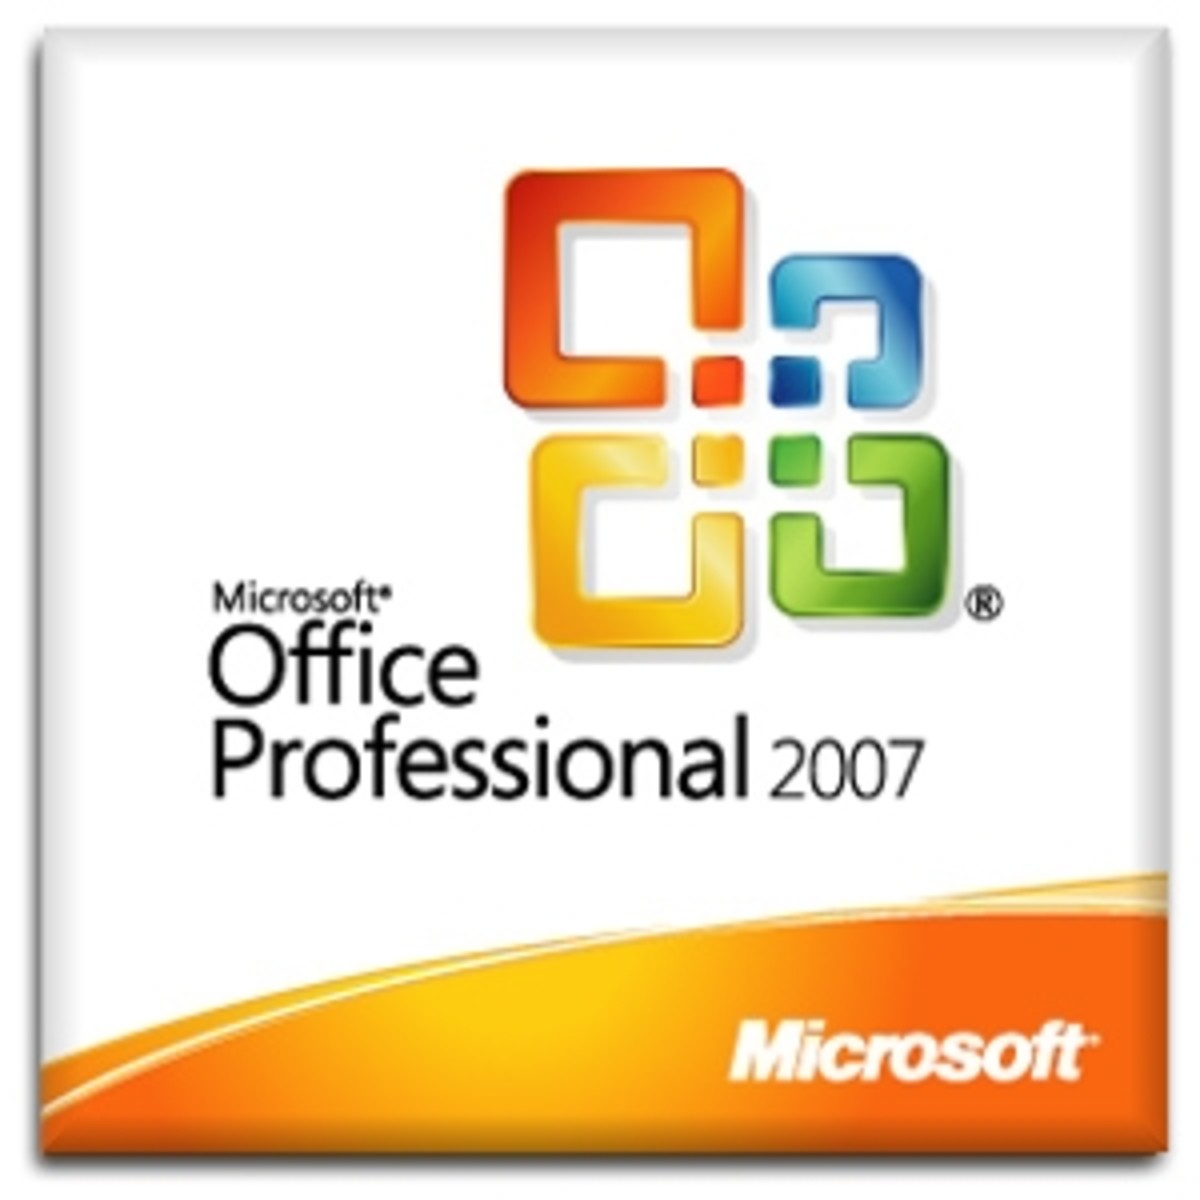 USEFUL PLUGINS FOR MICROSOFT OFFICE